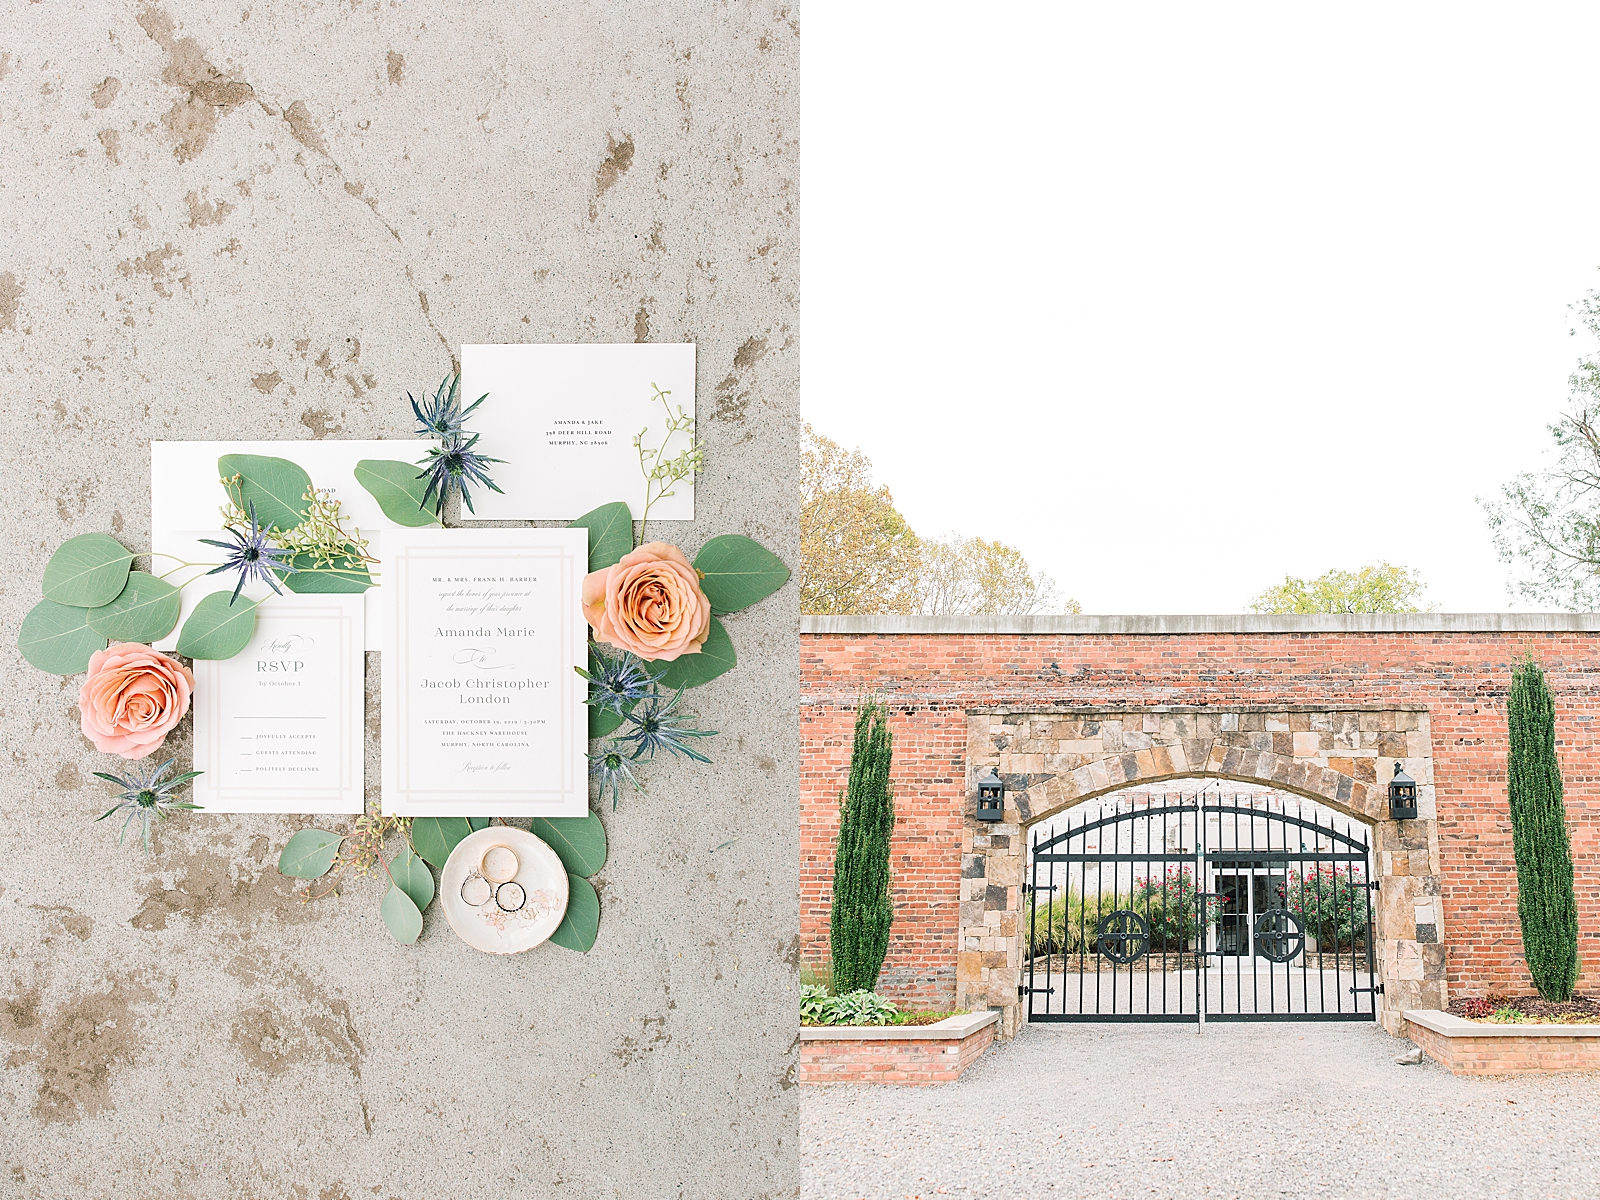 The Hackney Warehouse Wedding Invitation Suite and Iron Gate Entrance Photos